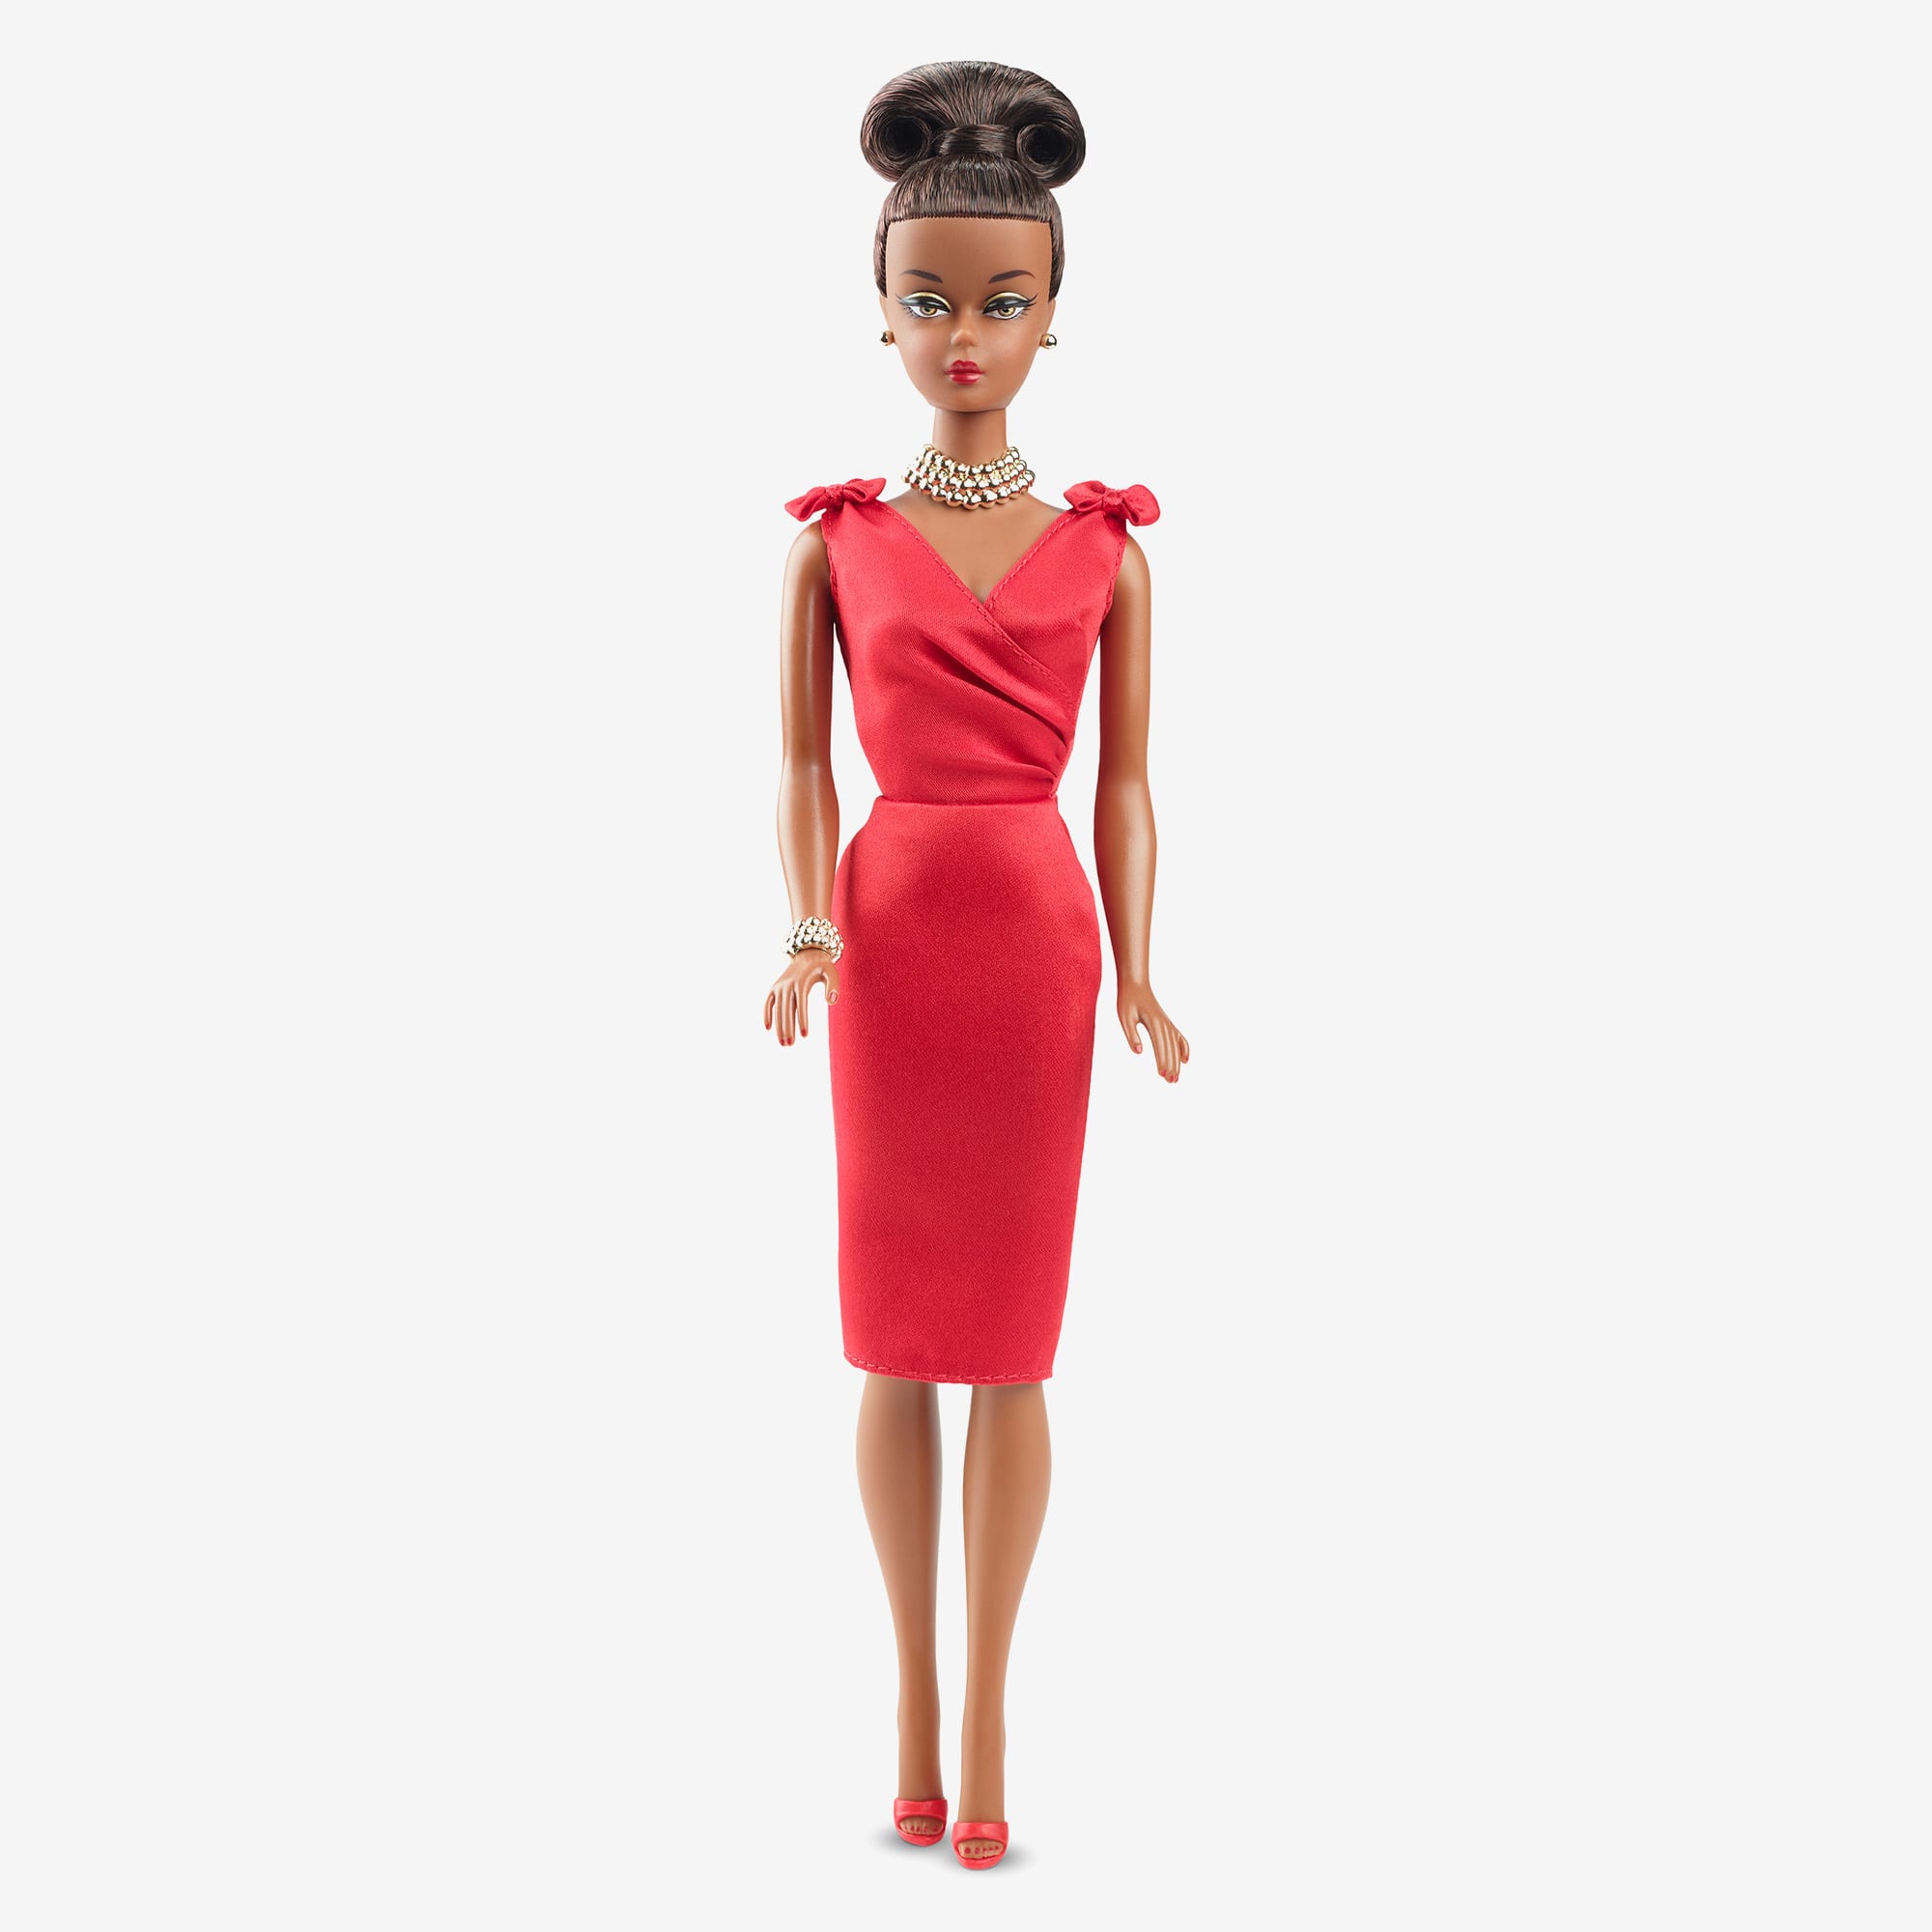 2023 “12 Days of Christmas” Barbie Doll Mattel Creations